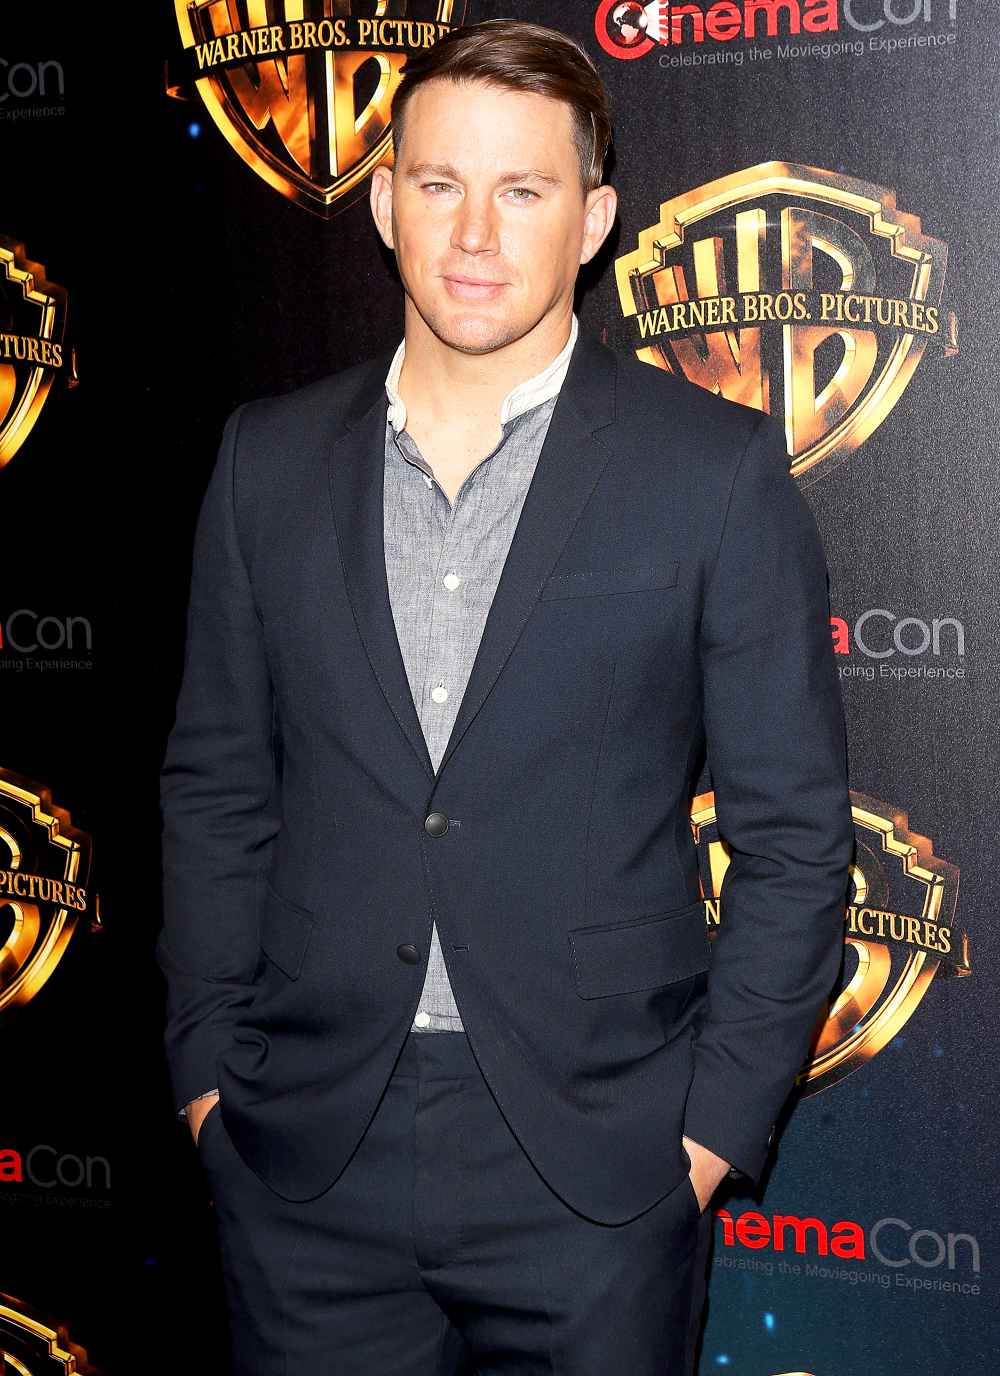 Channing Tatum attends the 2018 CinemaCon Warner Bros. Pictures "The Big Picture" at The Colosseum at Caesars Palace on April 24, 2018 in Las Vegas, Nevada.